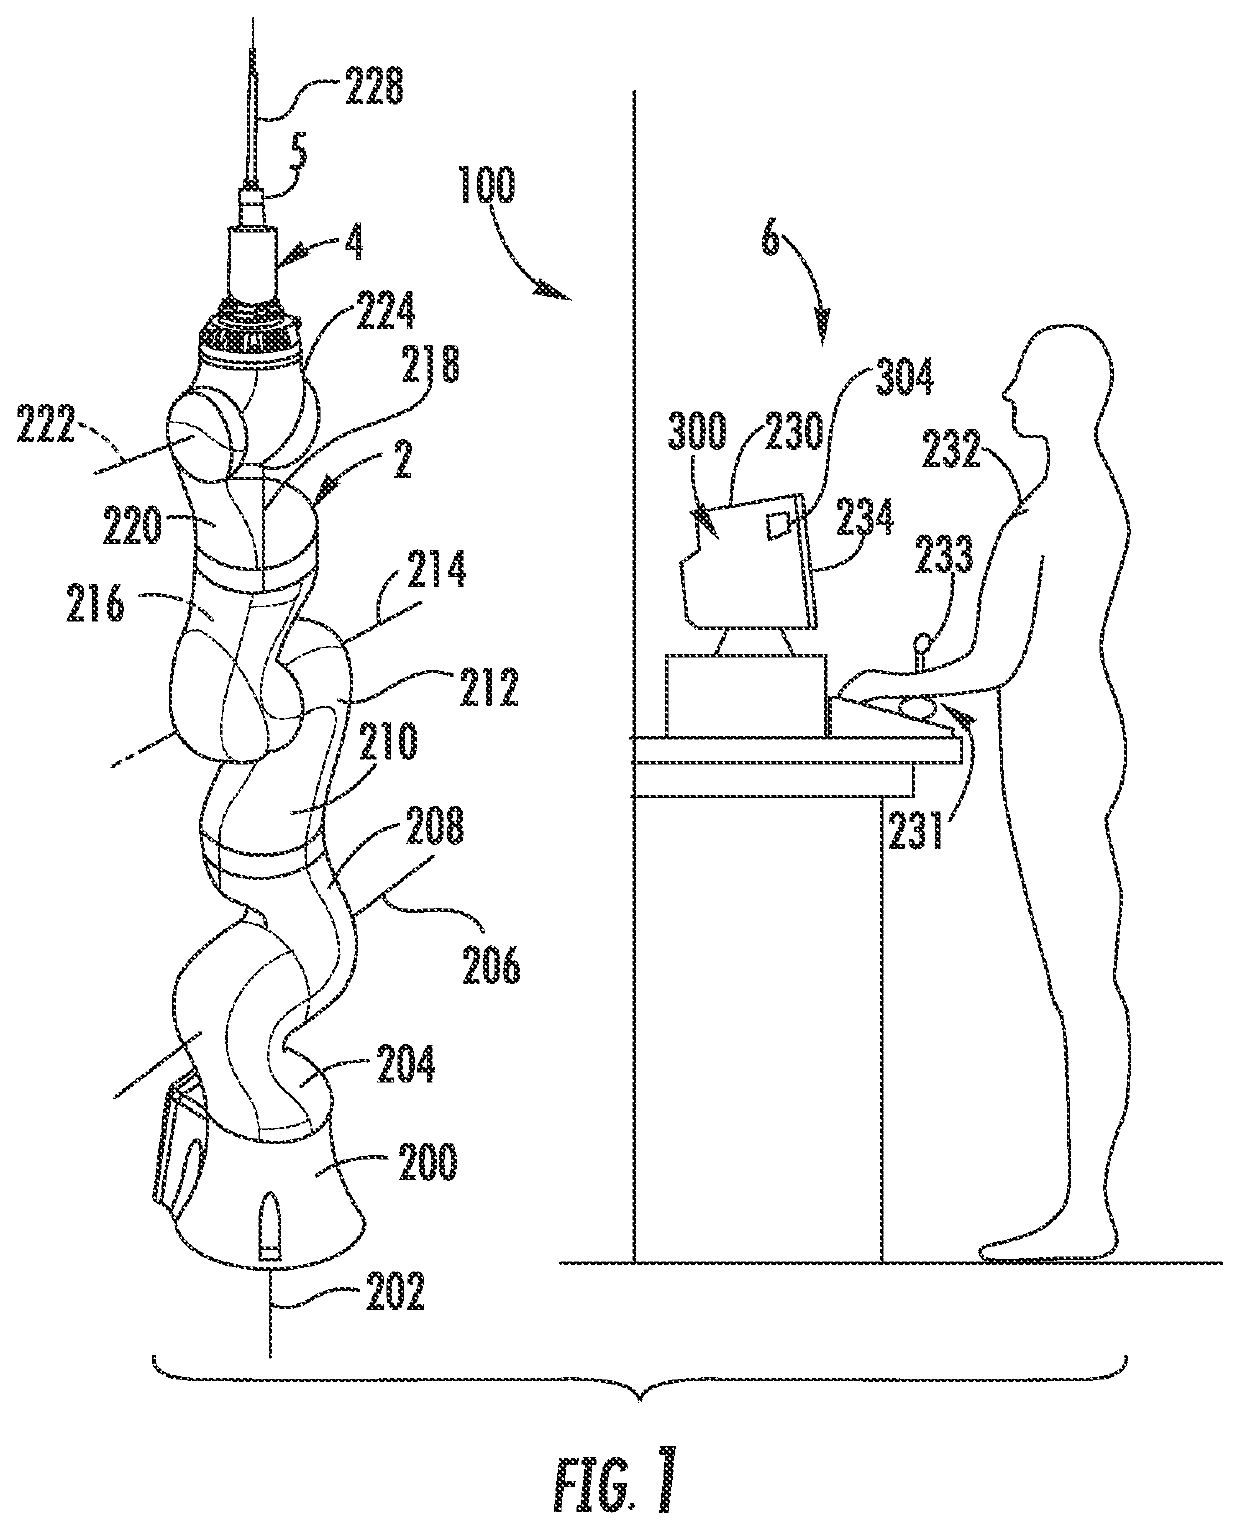 Robotic surgical system and method